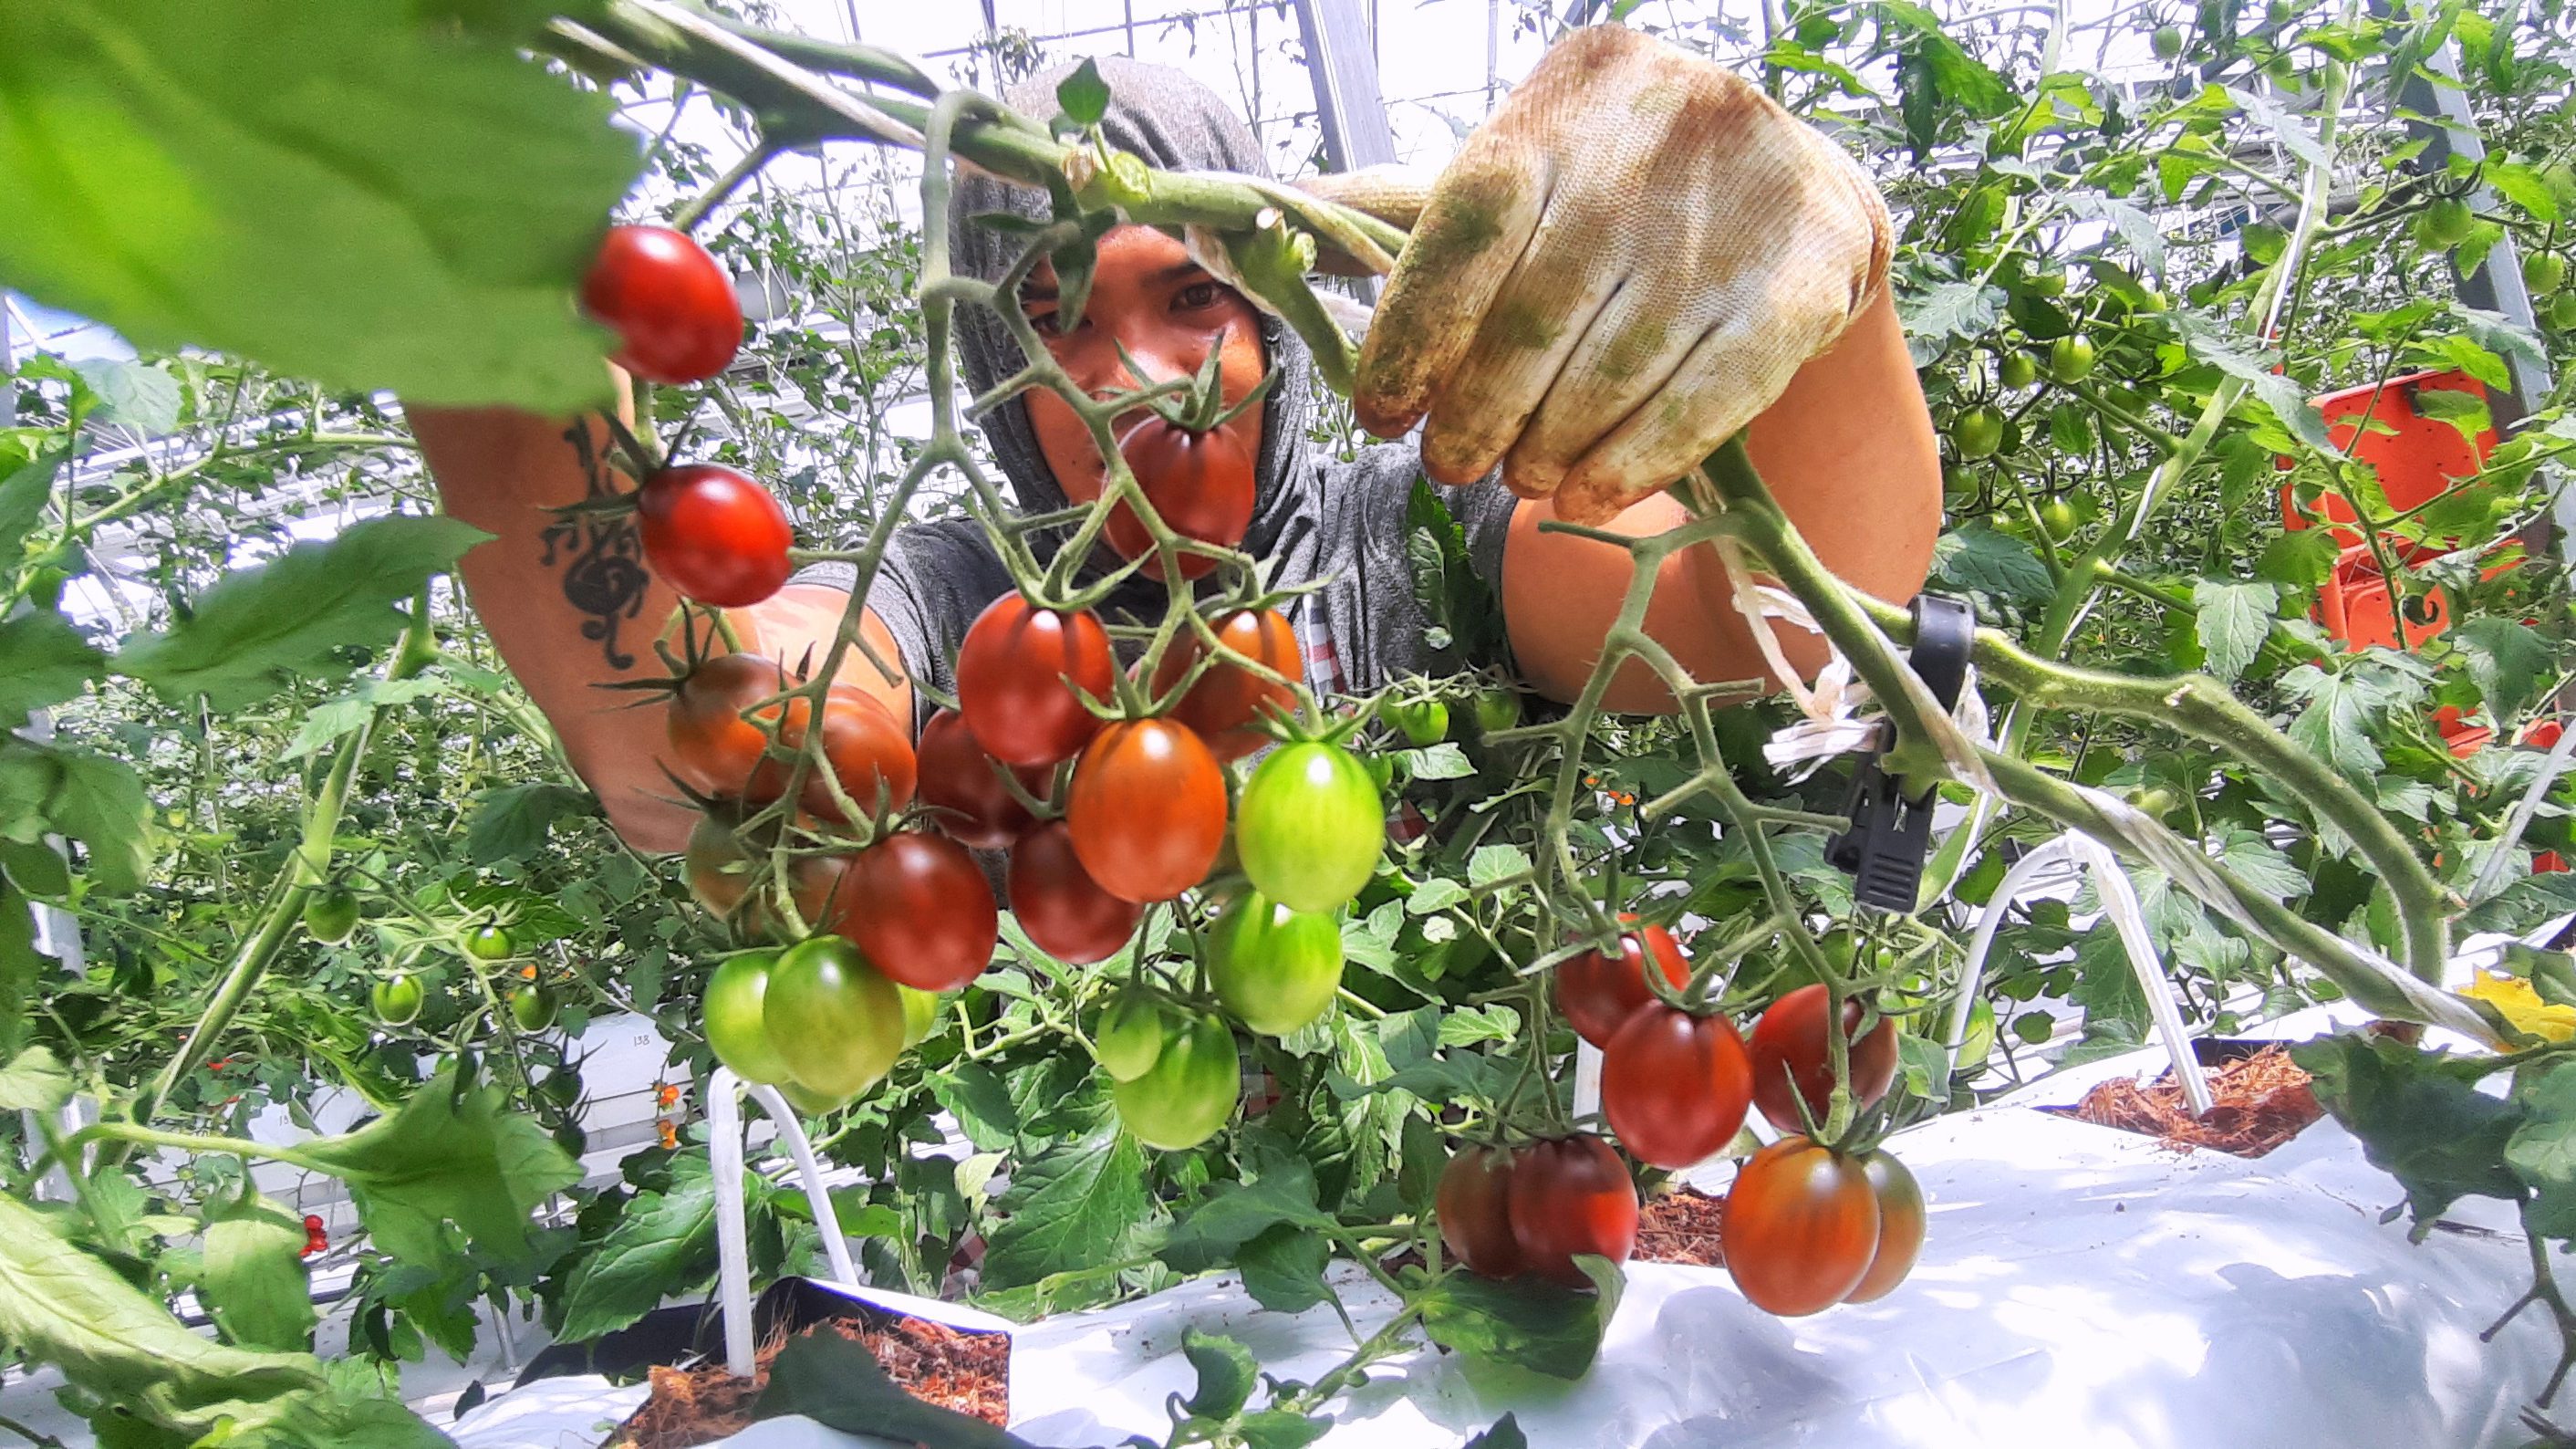 Korean tomatoes are thriving in Baguio City